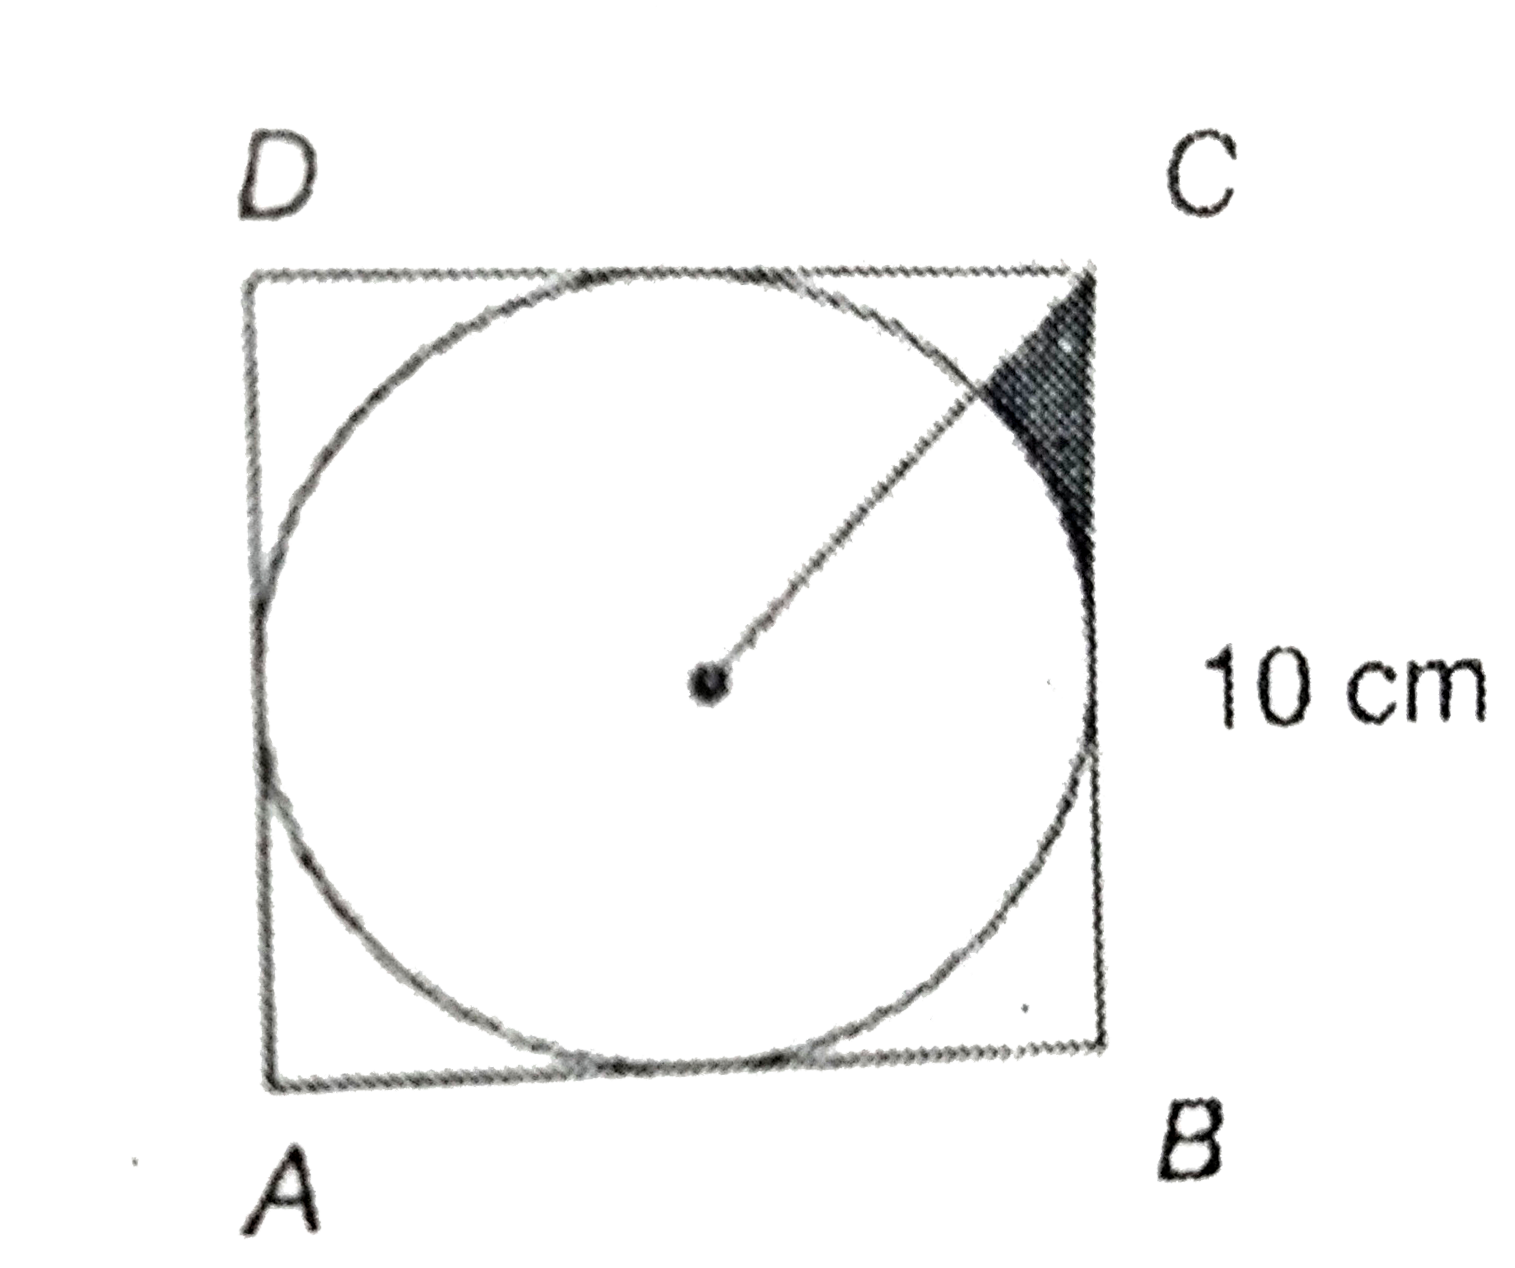 In The Figure Given Below Abcd Is A Square Of Side 10 Cm And A Circle 5279